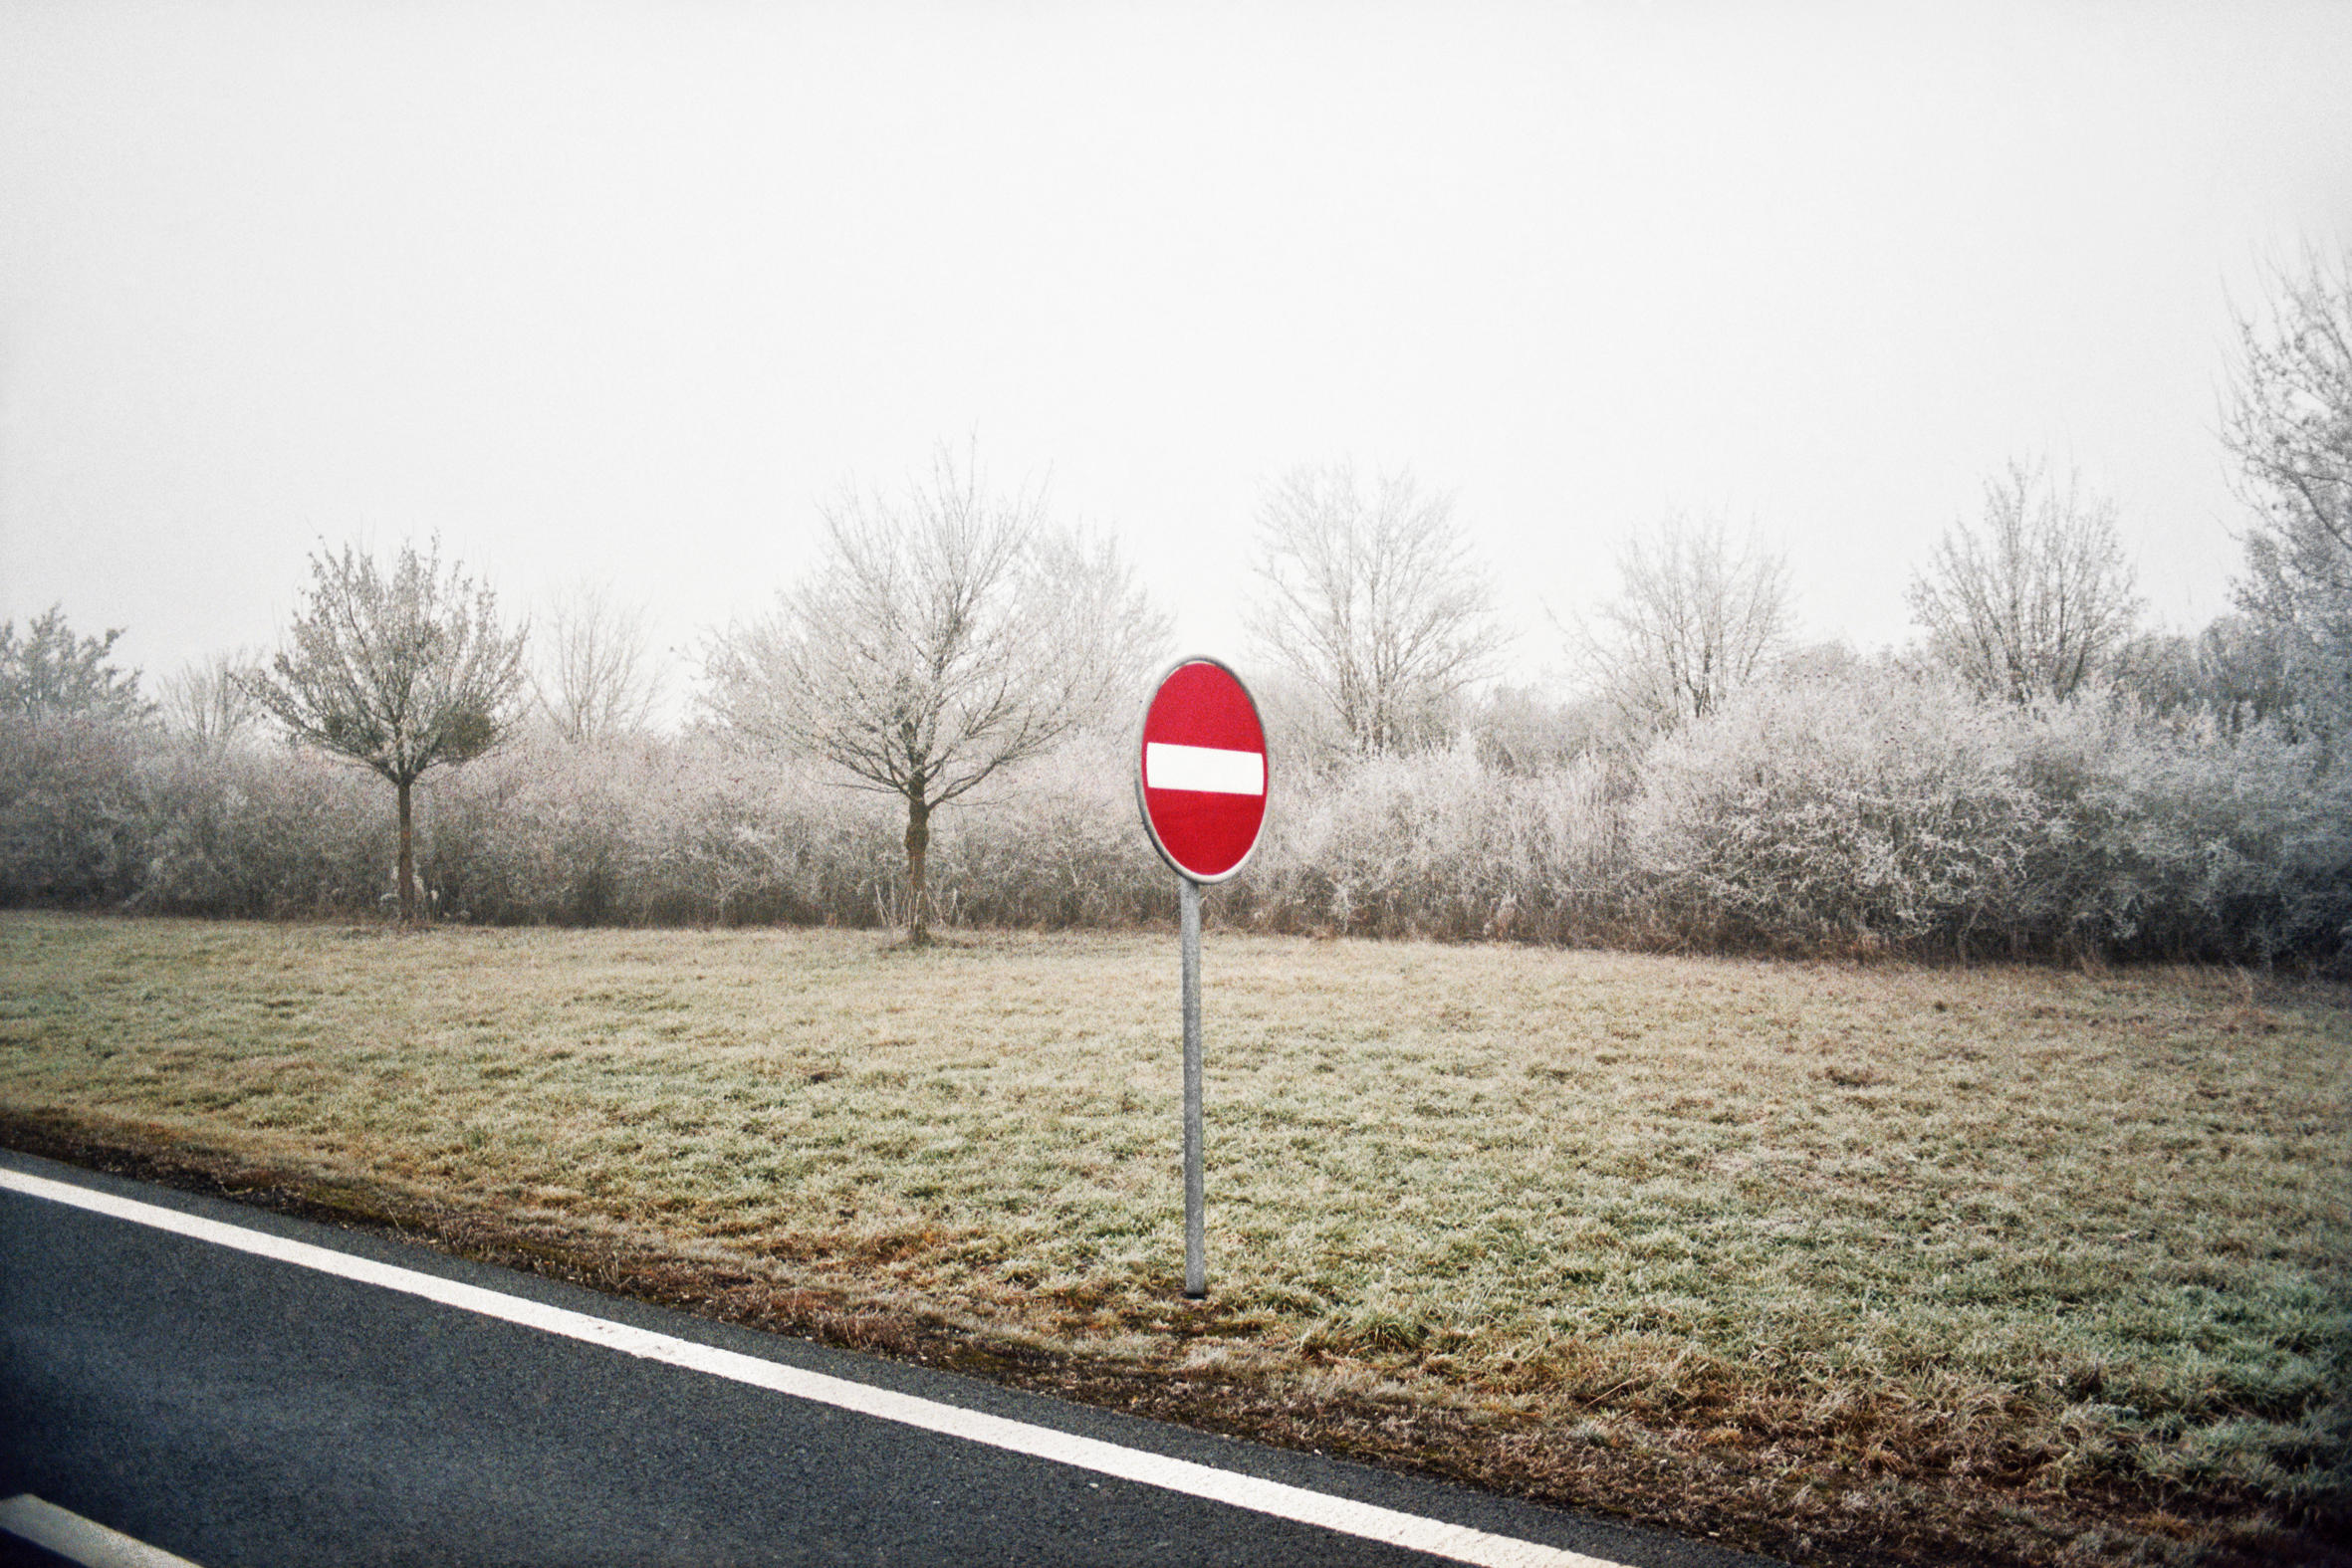 Street sign surrounded by a wintry field